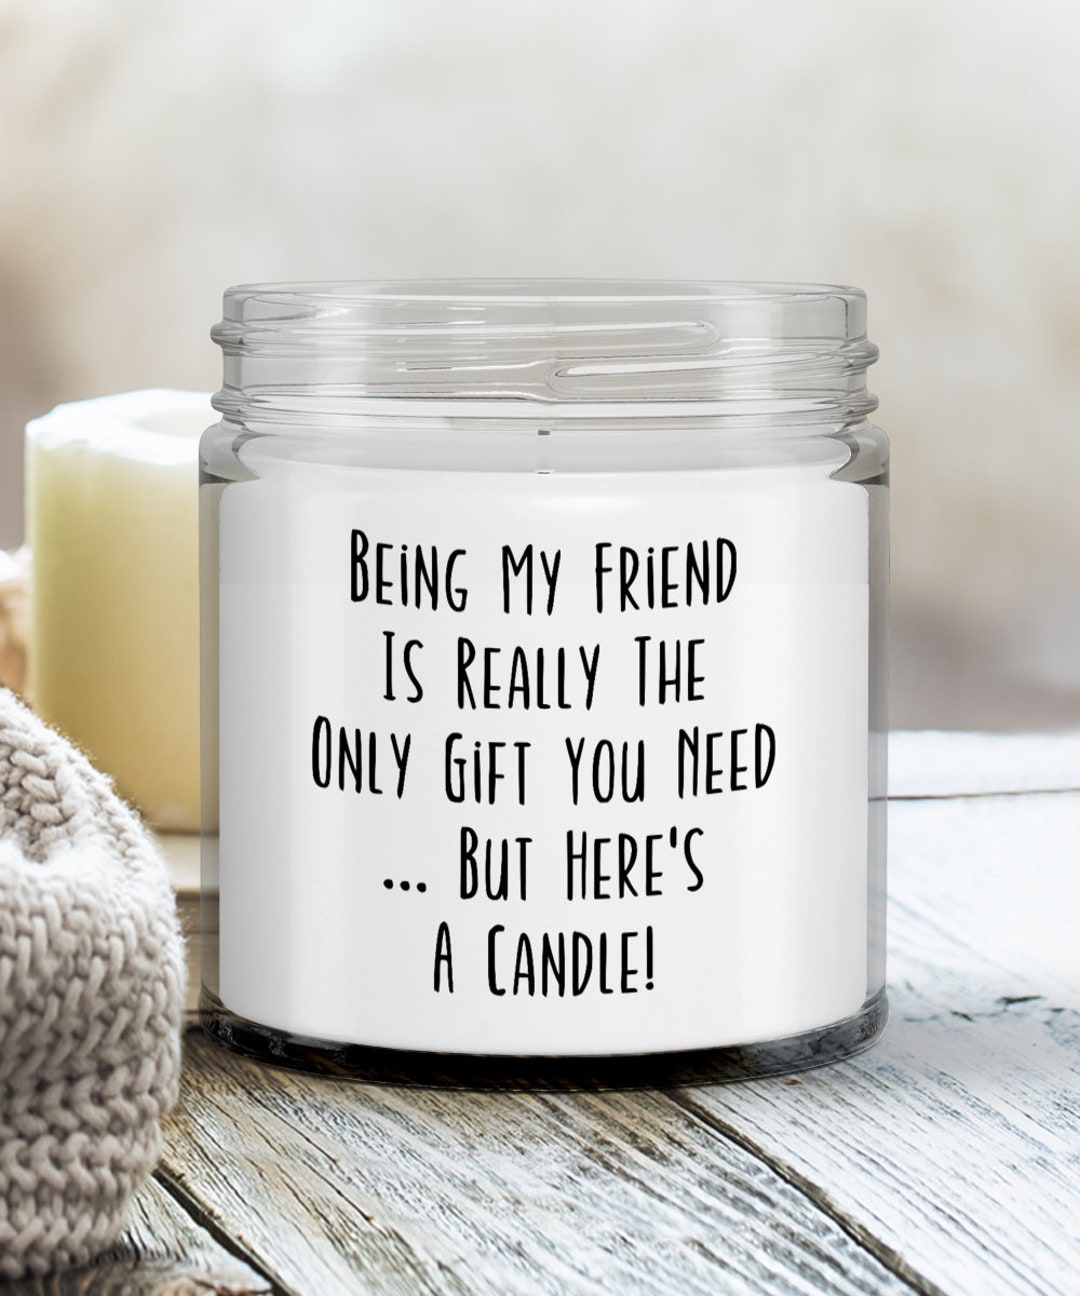 GSPY Scented Candles - BFF Gifts, Best Friend Christmas Gifts for Women,  Men - Best Friend Candle, Bestie Gifts - Funny Birthday, Long Distance